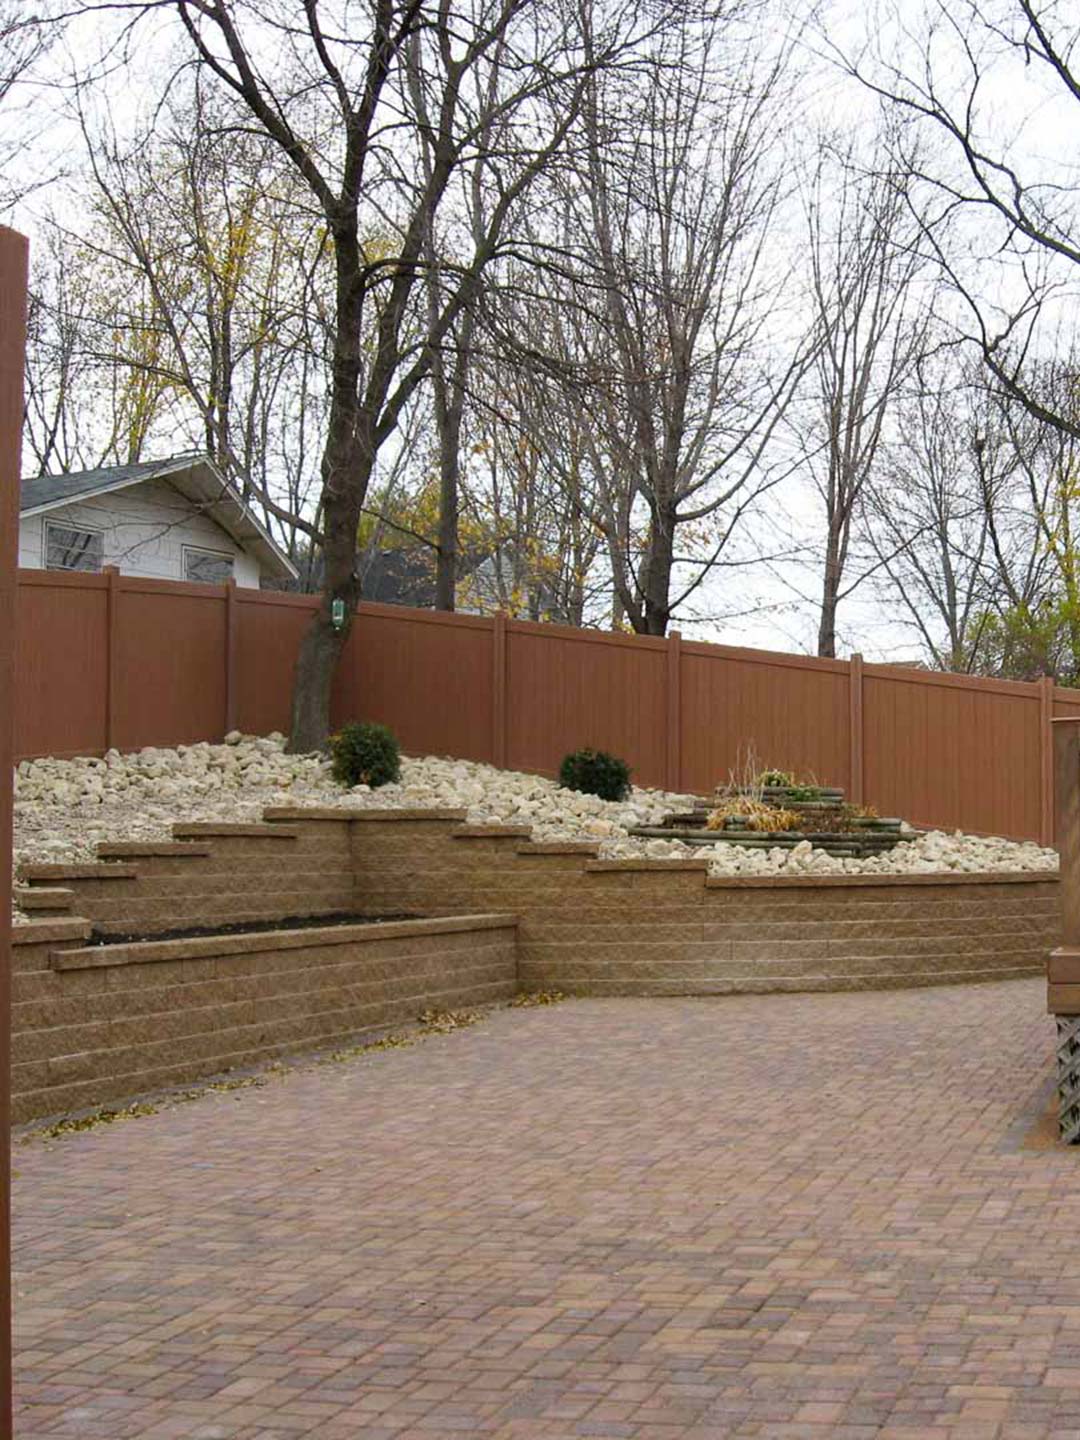 Landscape services in Savage, MN from Greenside Inc